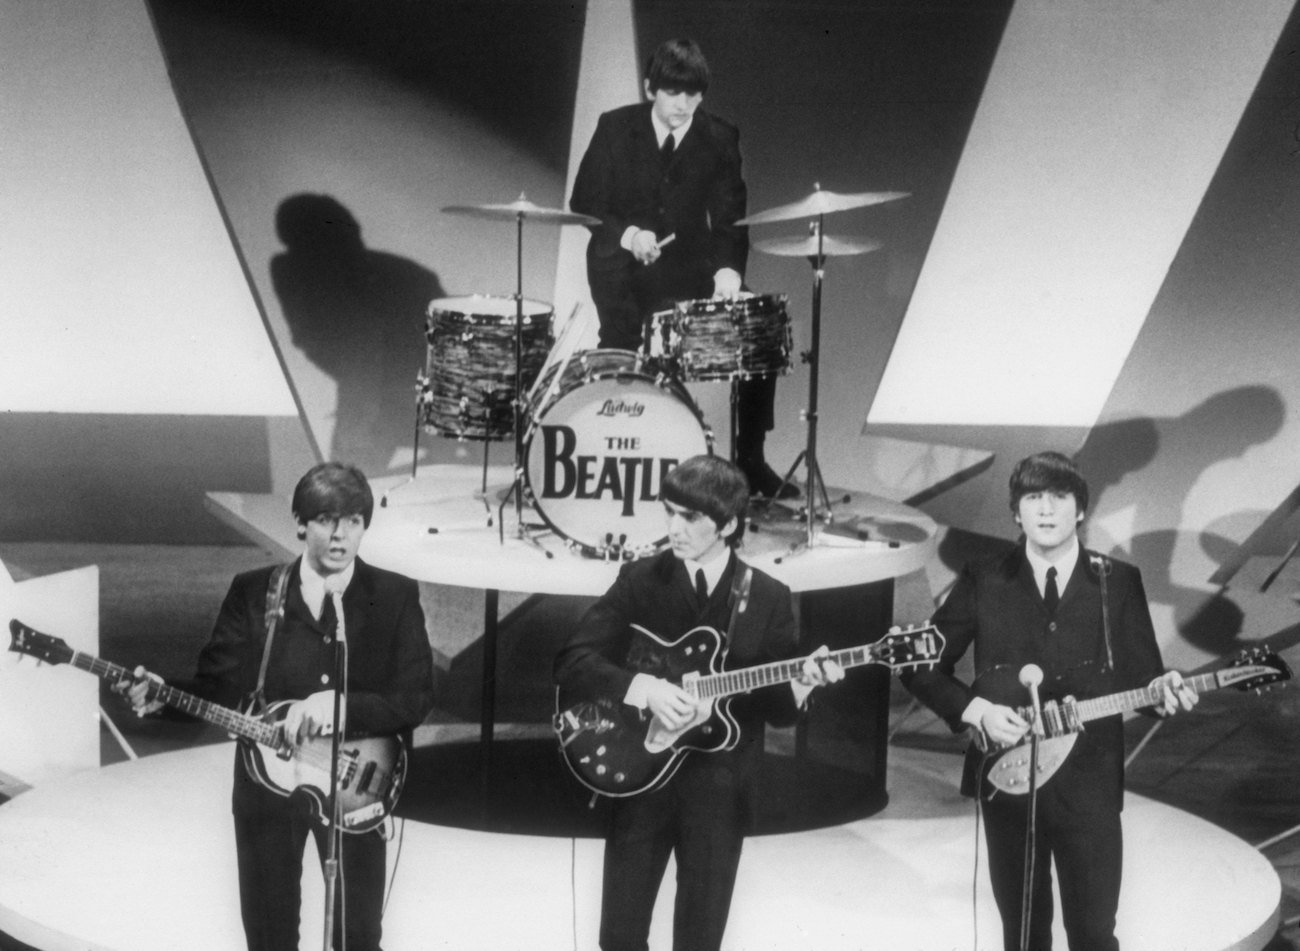 The Beatles in suits while performing on 'The Ed Sullivan Show' on Feb. 9, 1964.